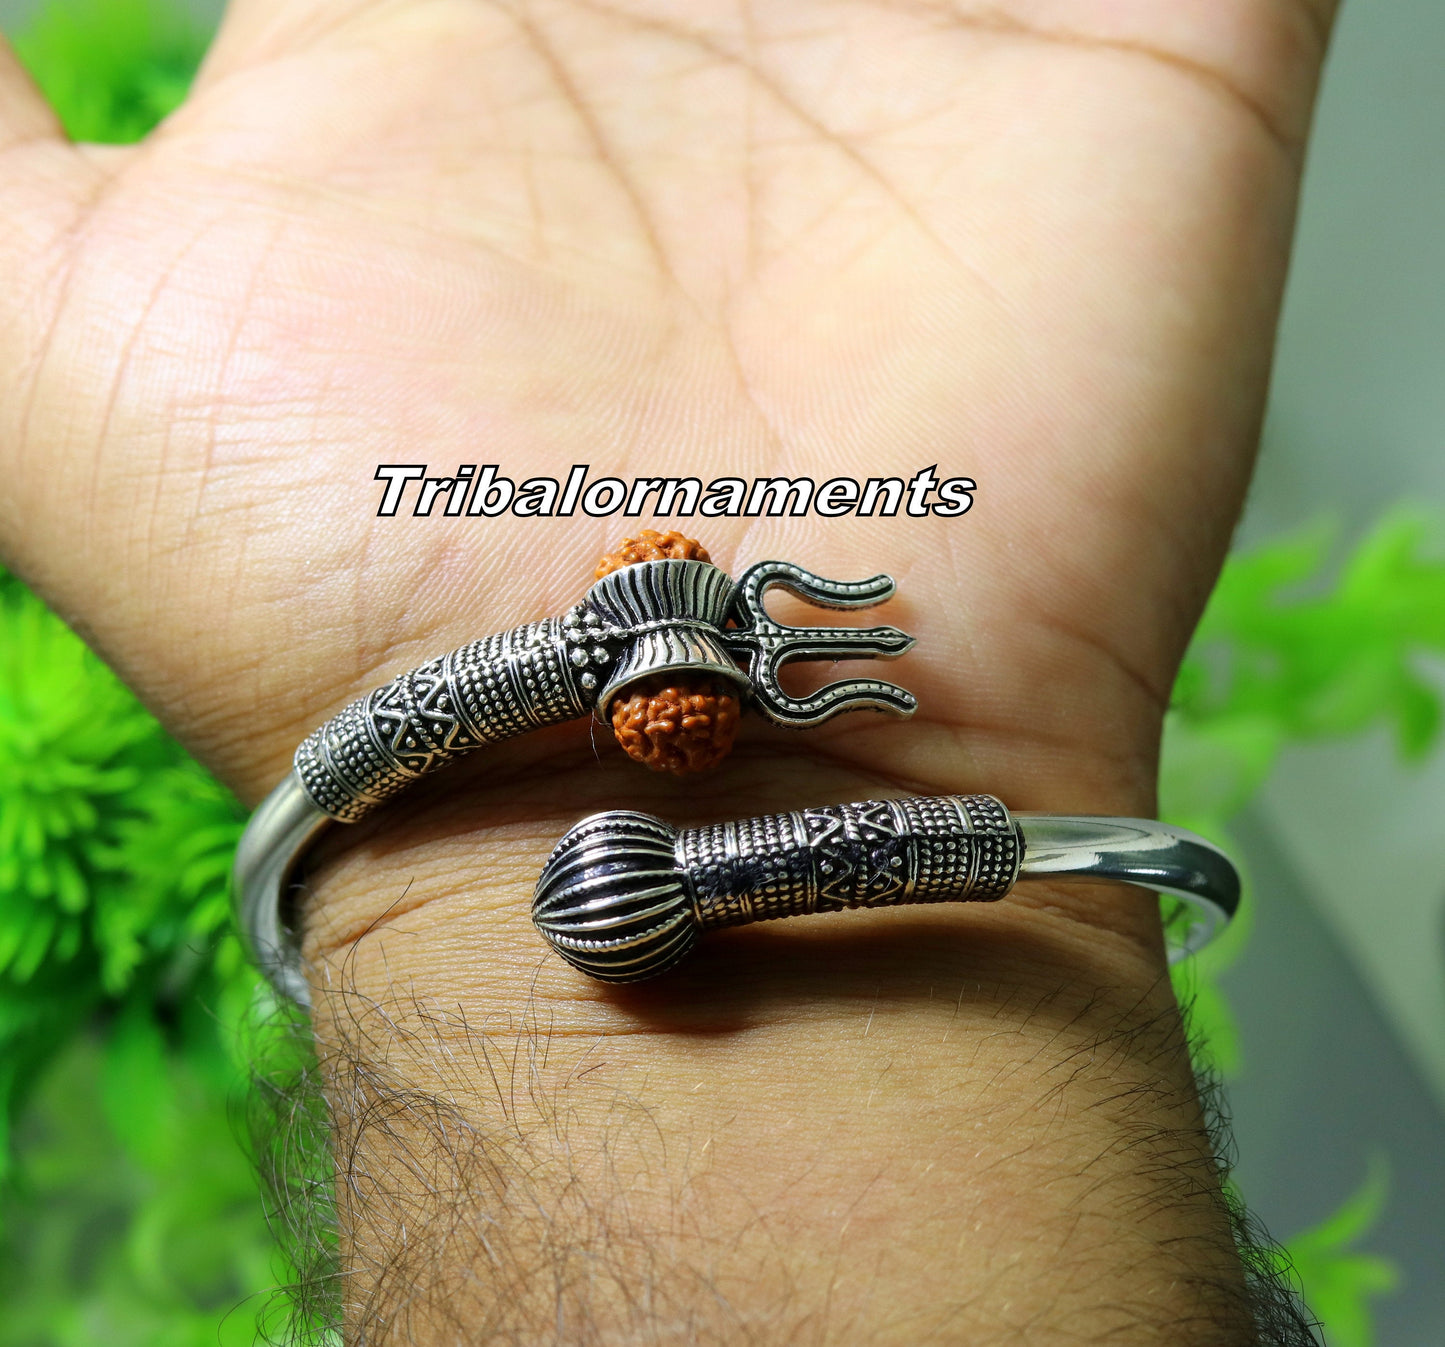 Rudraksha beads Handcrafted 925 sterling silver bangle bracelet kada excellent Lord shiva trident customized jewelry,gifting unisex nsk241 - TRIBAL ORNAMENTS